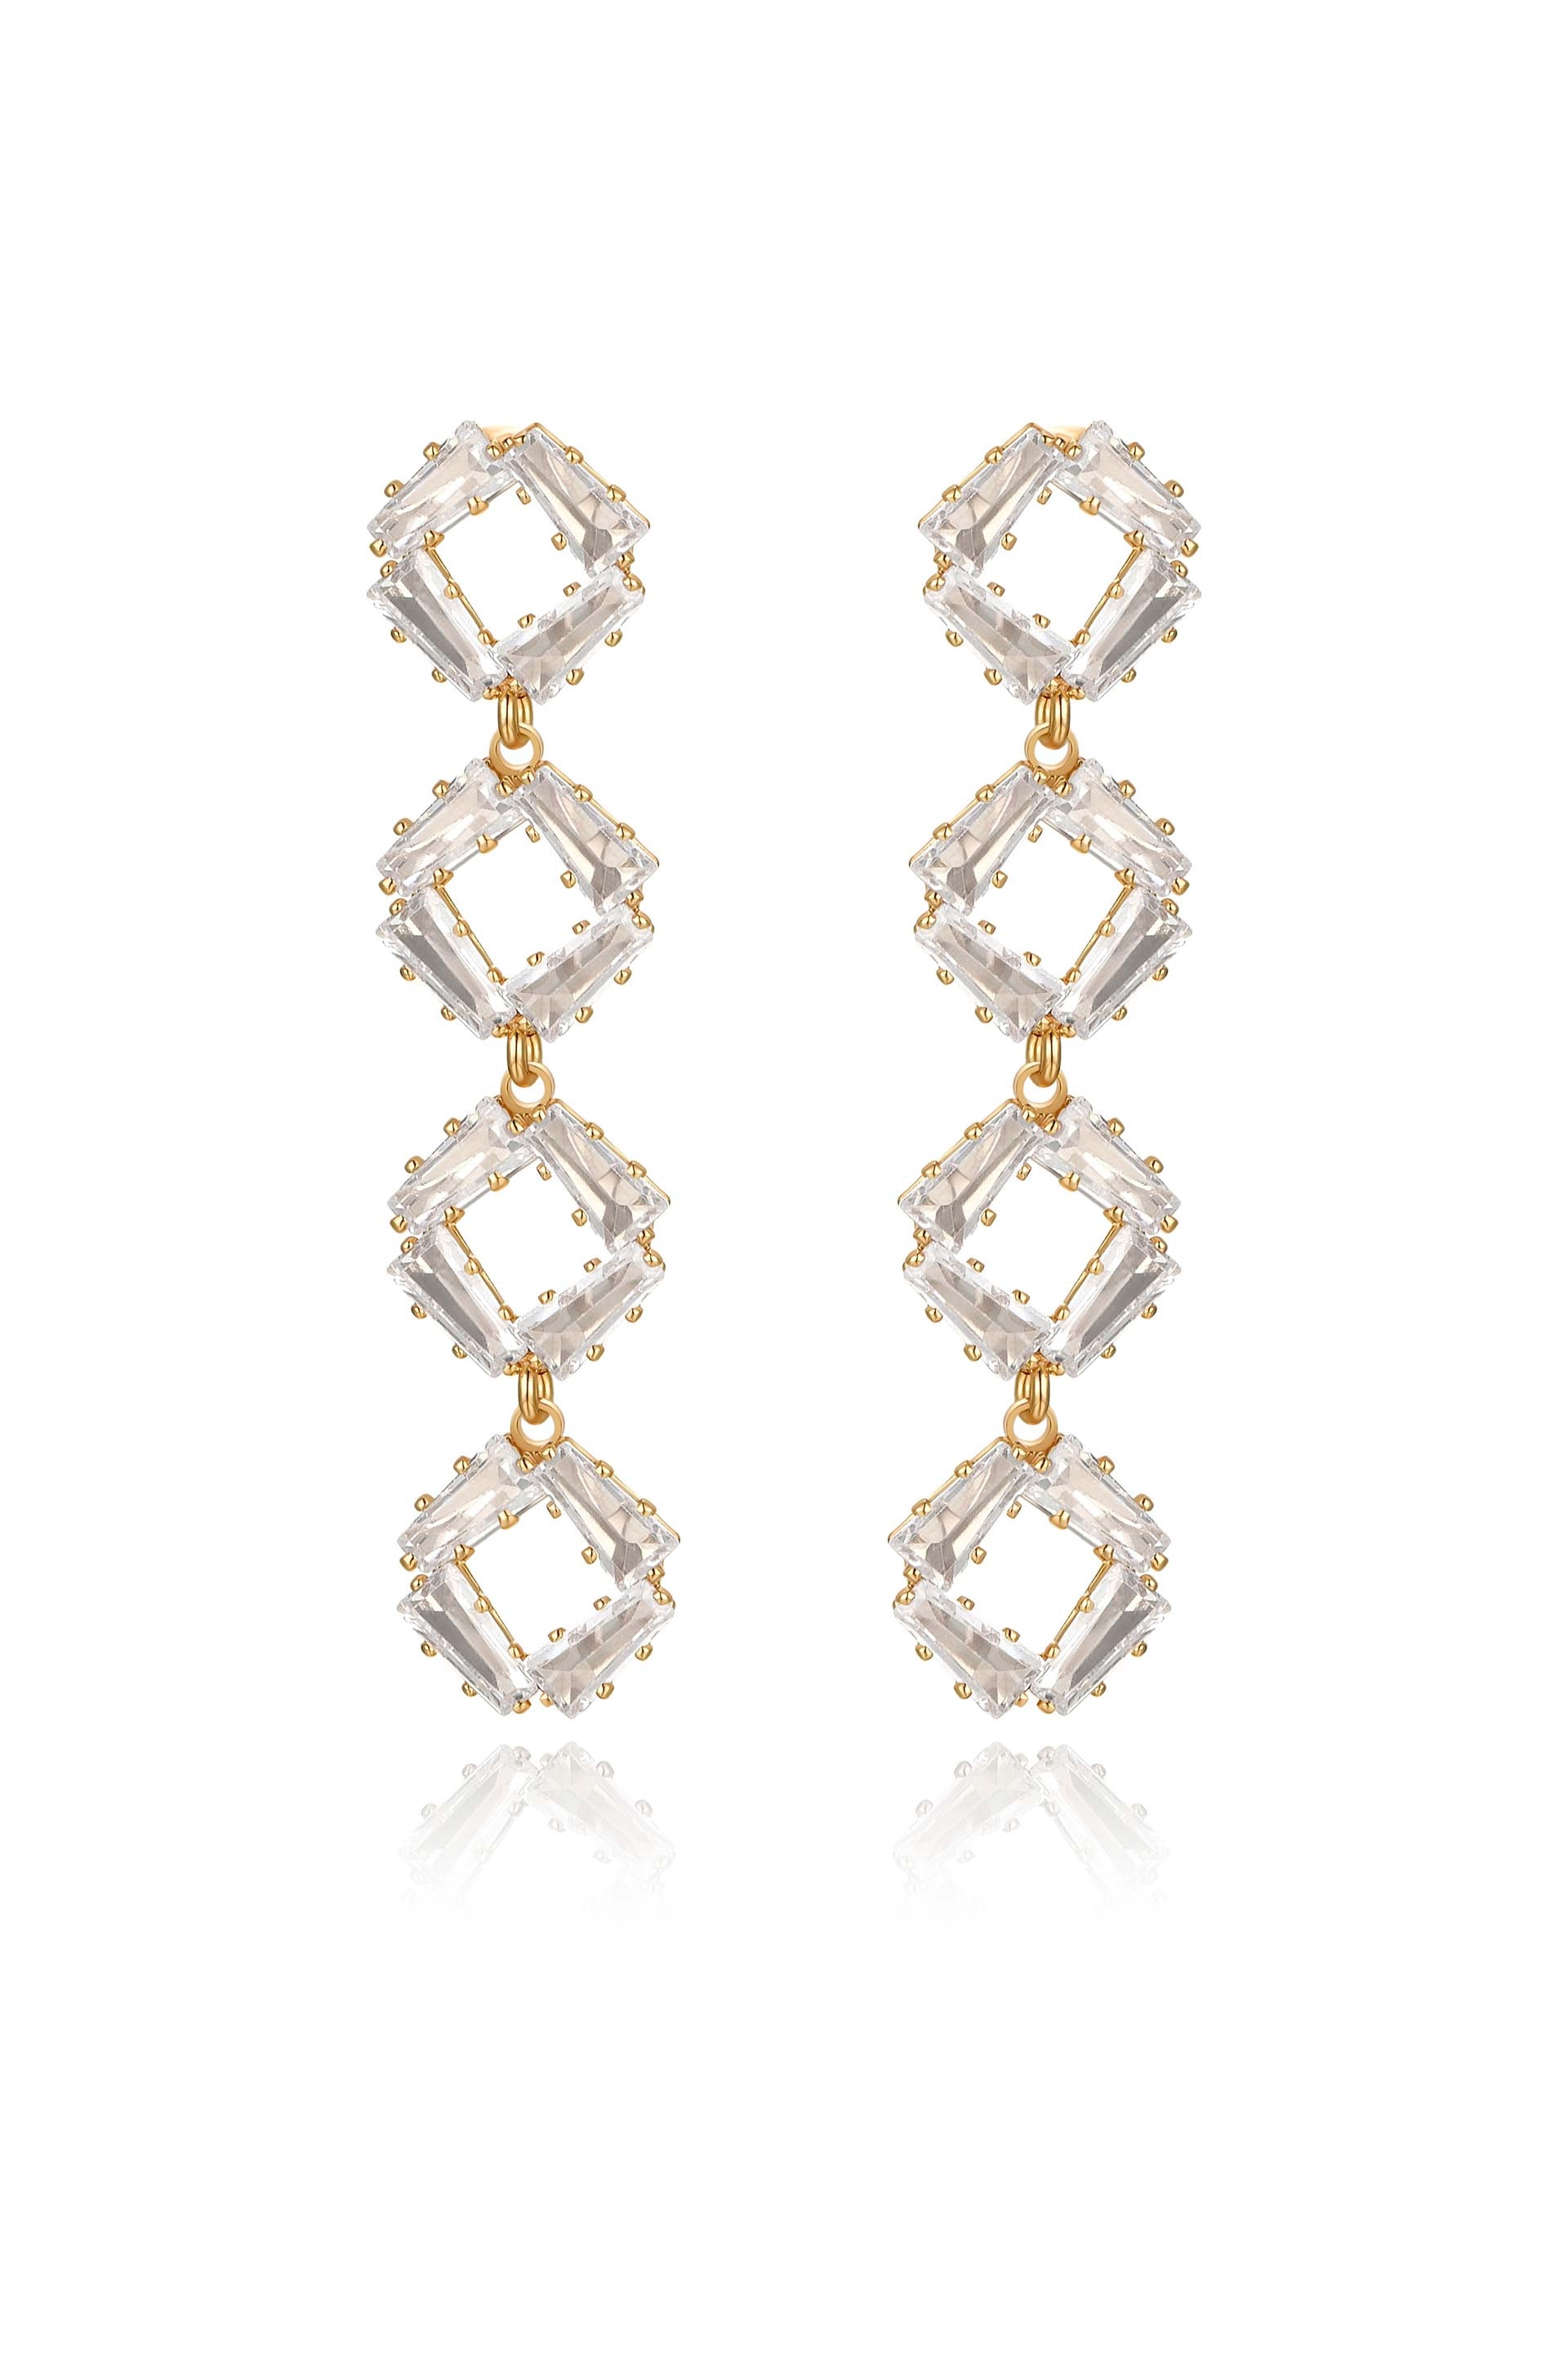 Never Dull your Shine 18k Gold Plated Crystal Drop Earrings